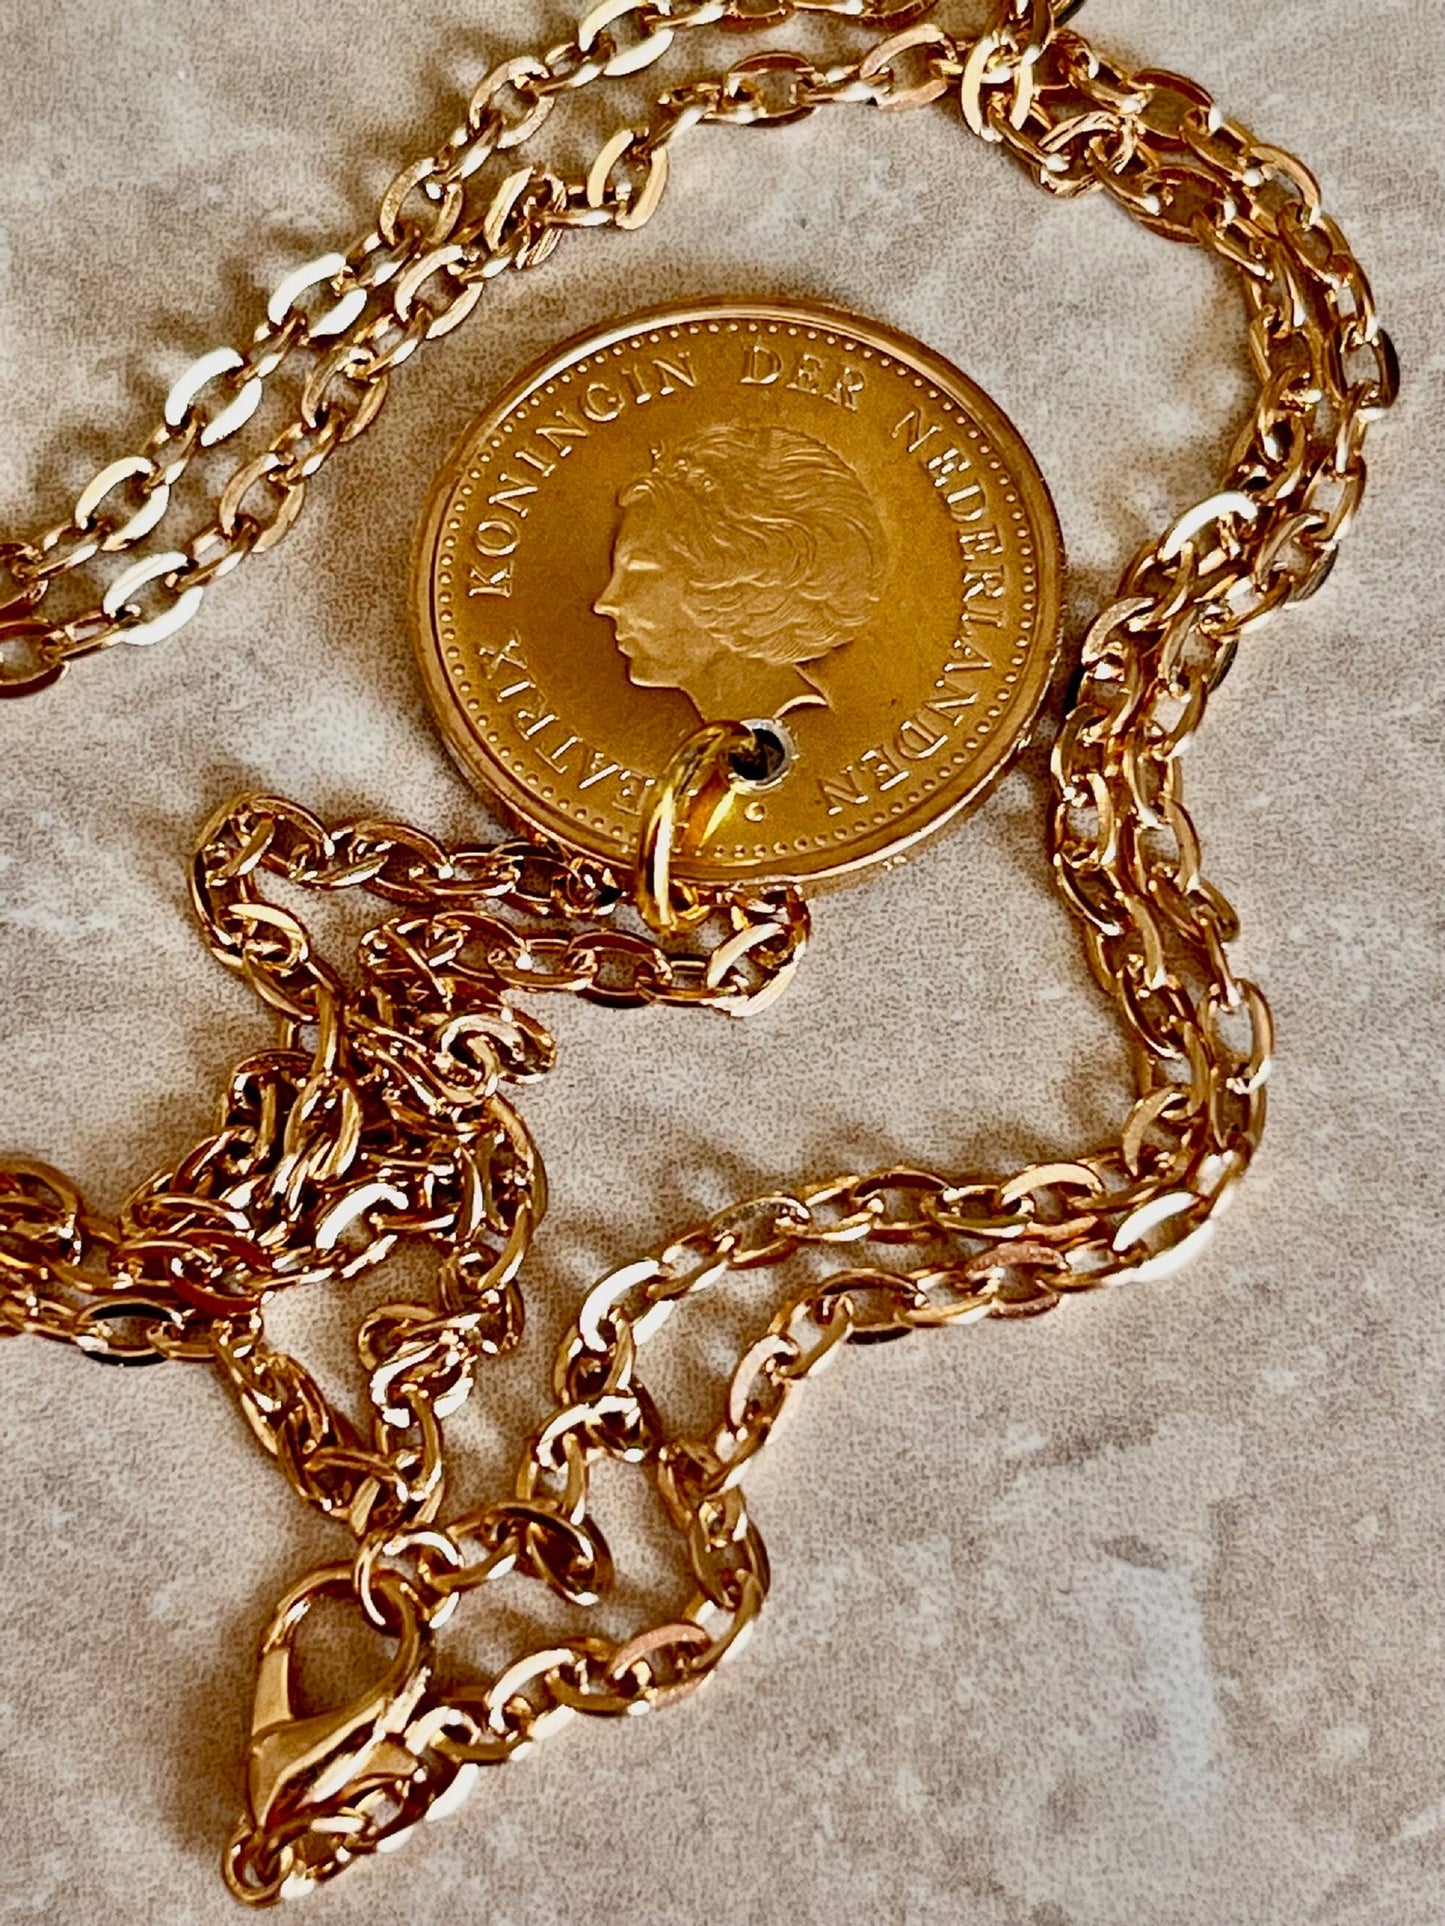 Netherland Coin Pendant Antilles Gulden Queen Juliana Necklace Jewelry Gift For Friend Coin Charm Gift For Him, Her, World Coins Collector